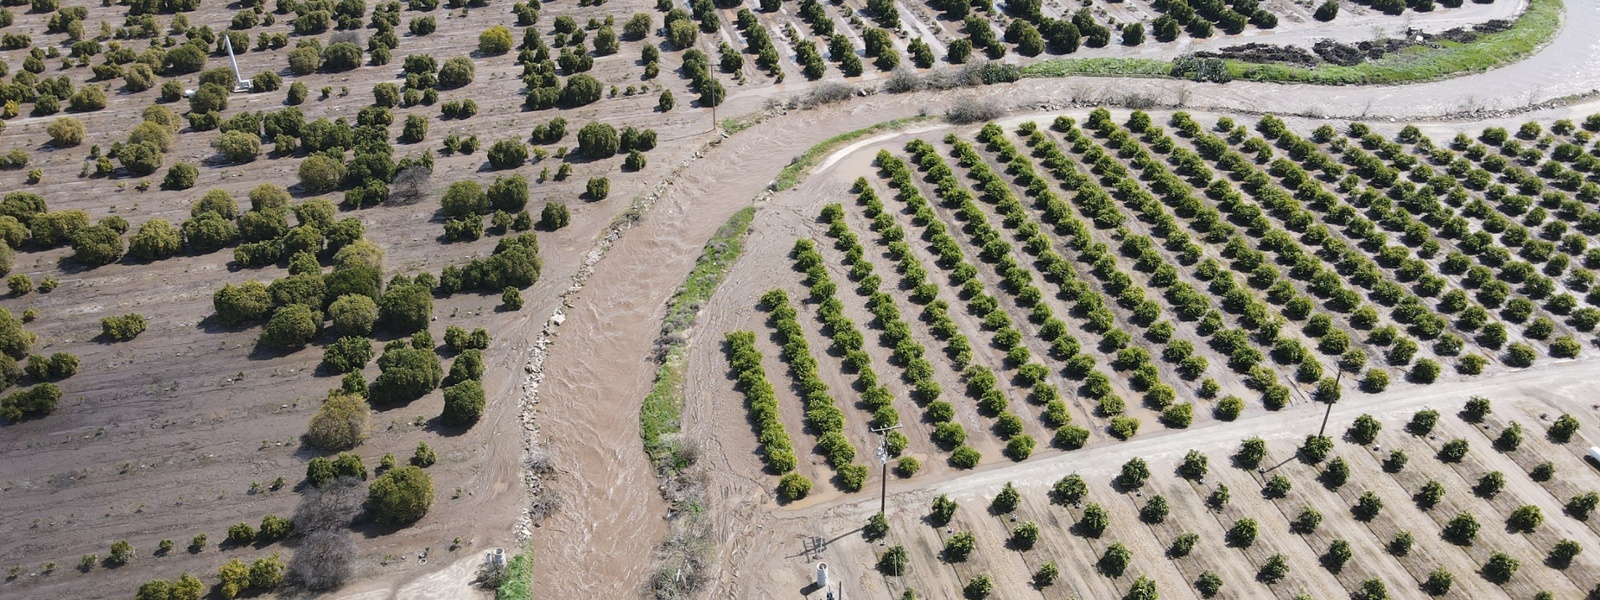 Farms statewide hit by storms and floods